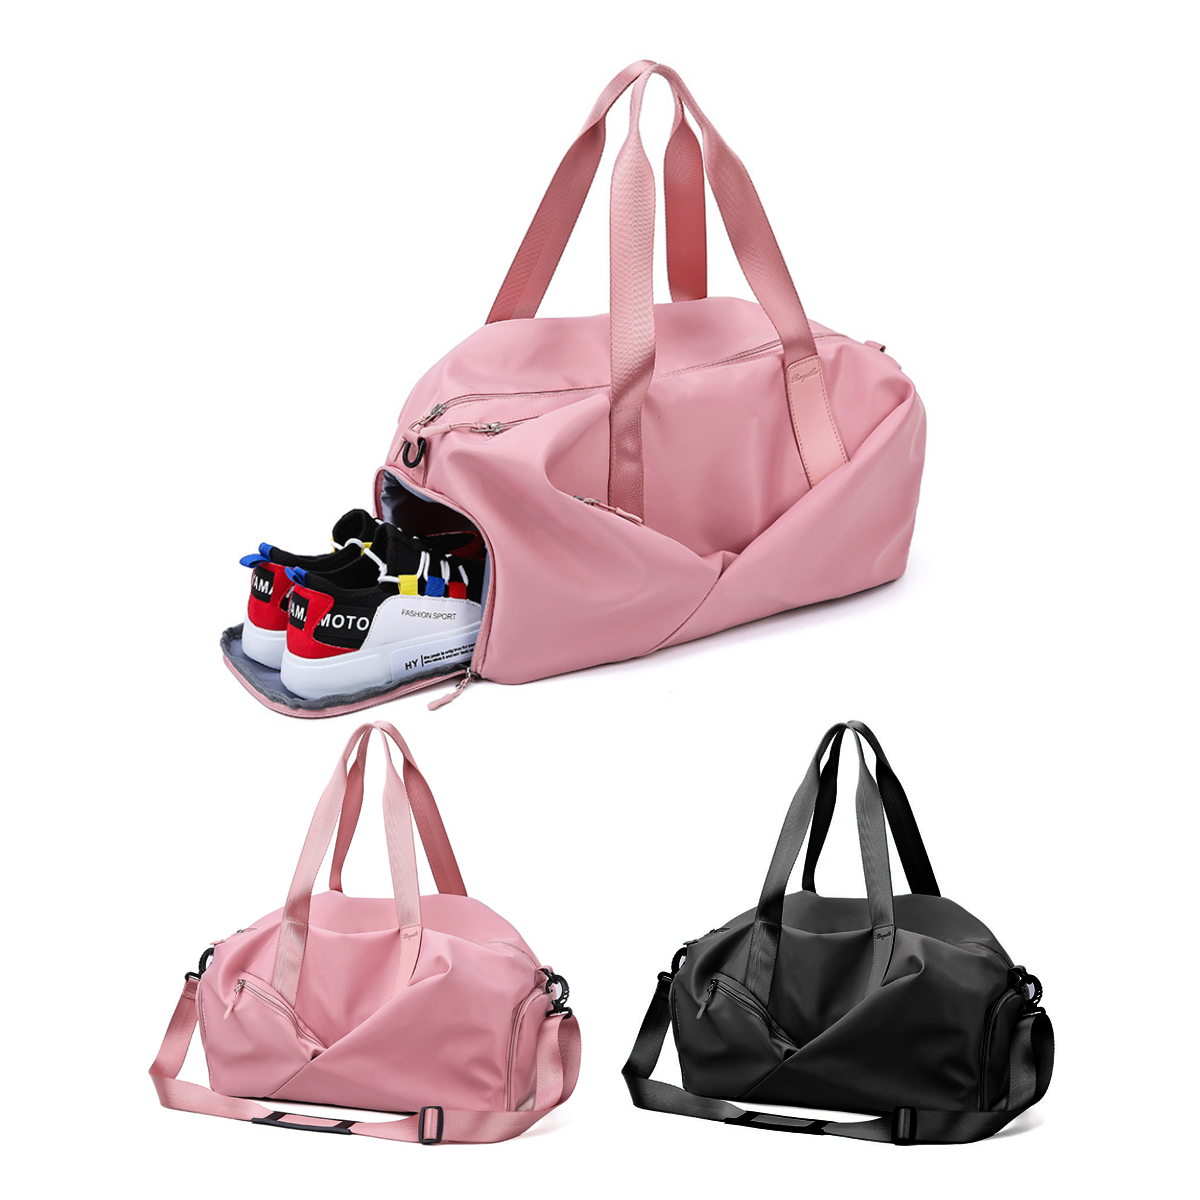 Fashionable Gym Bag with Wet Pocket